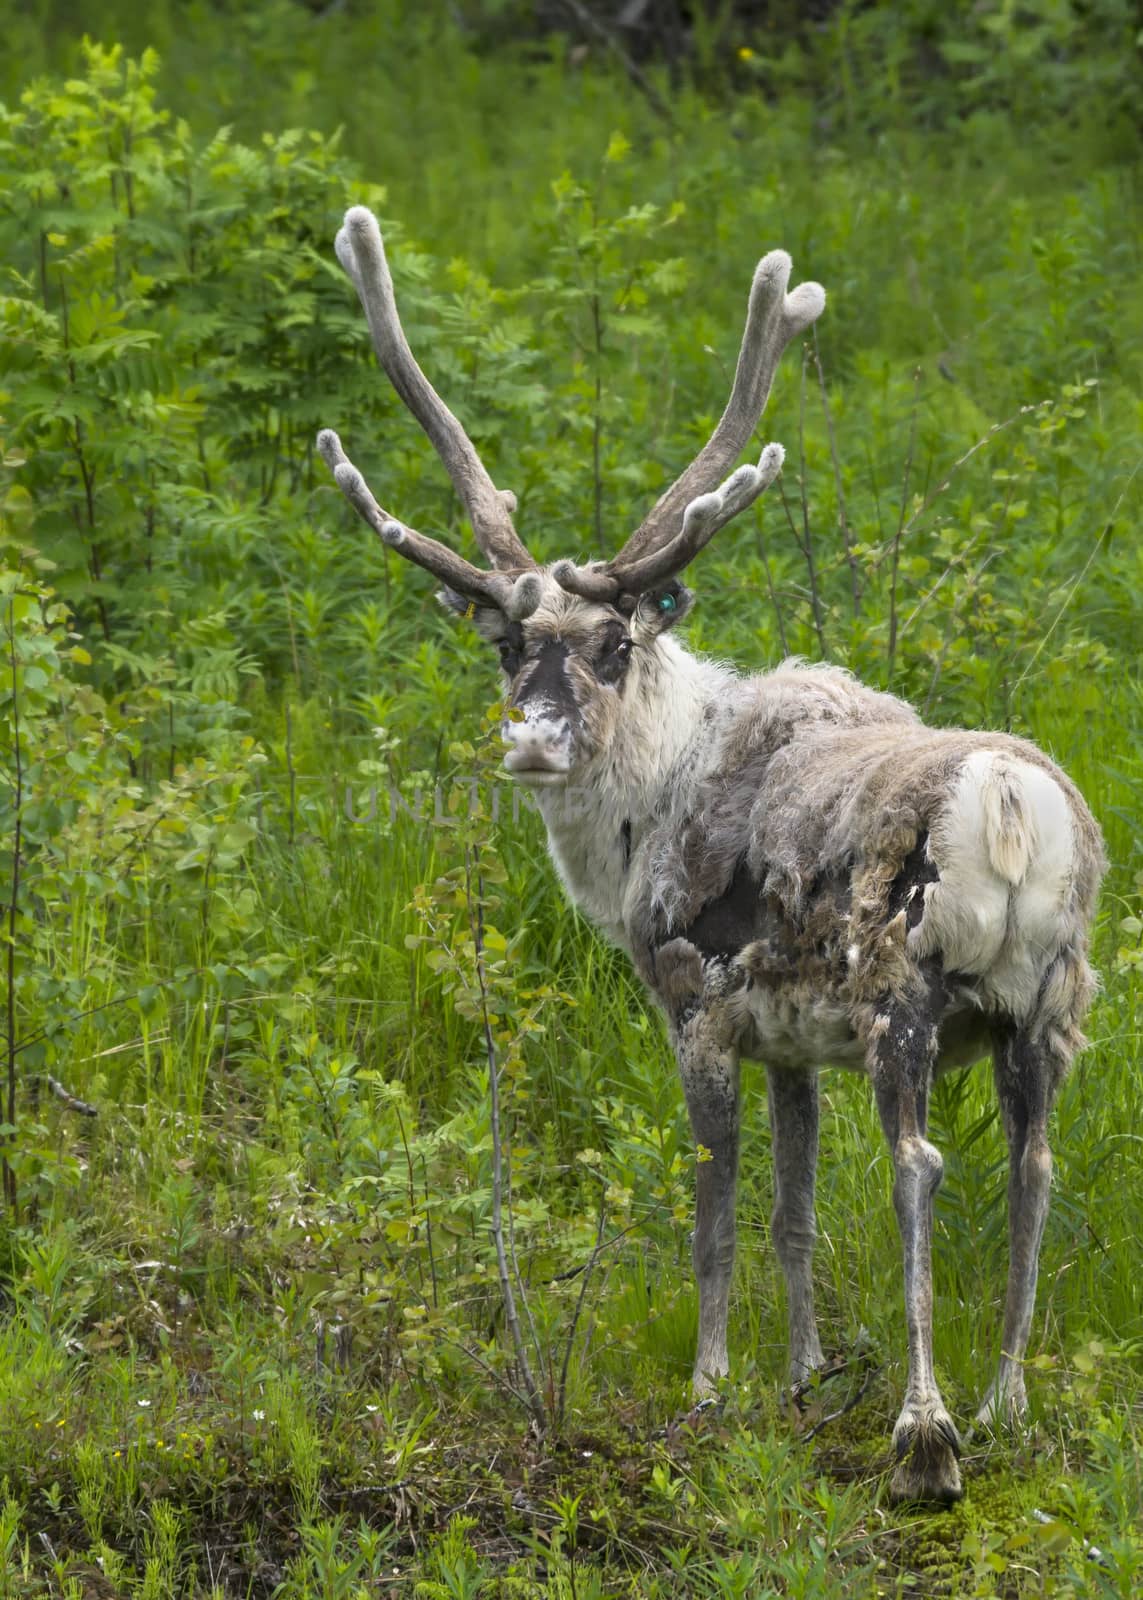 Adult reindeer against green environment in Lapland during summer by Claudine